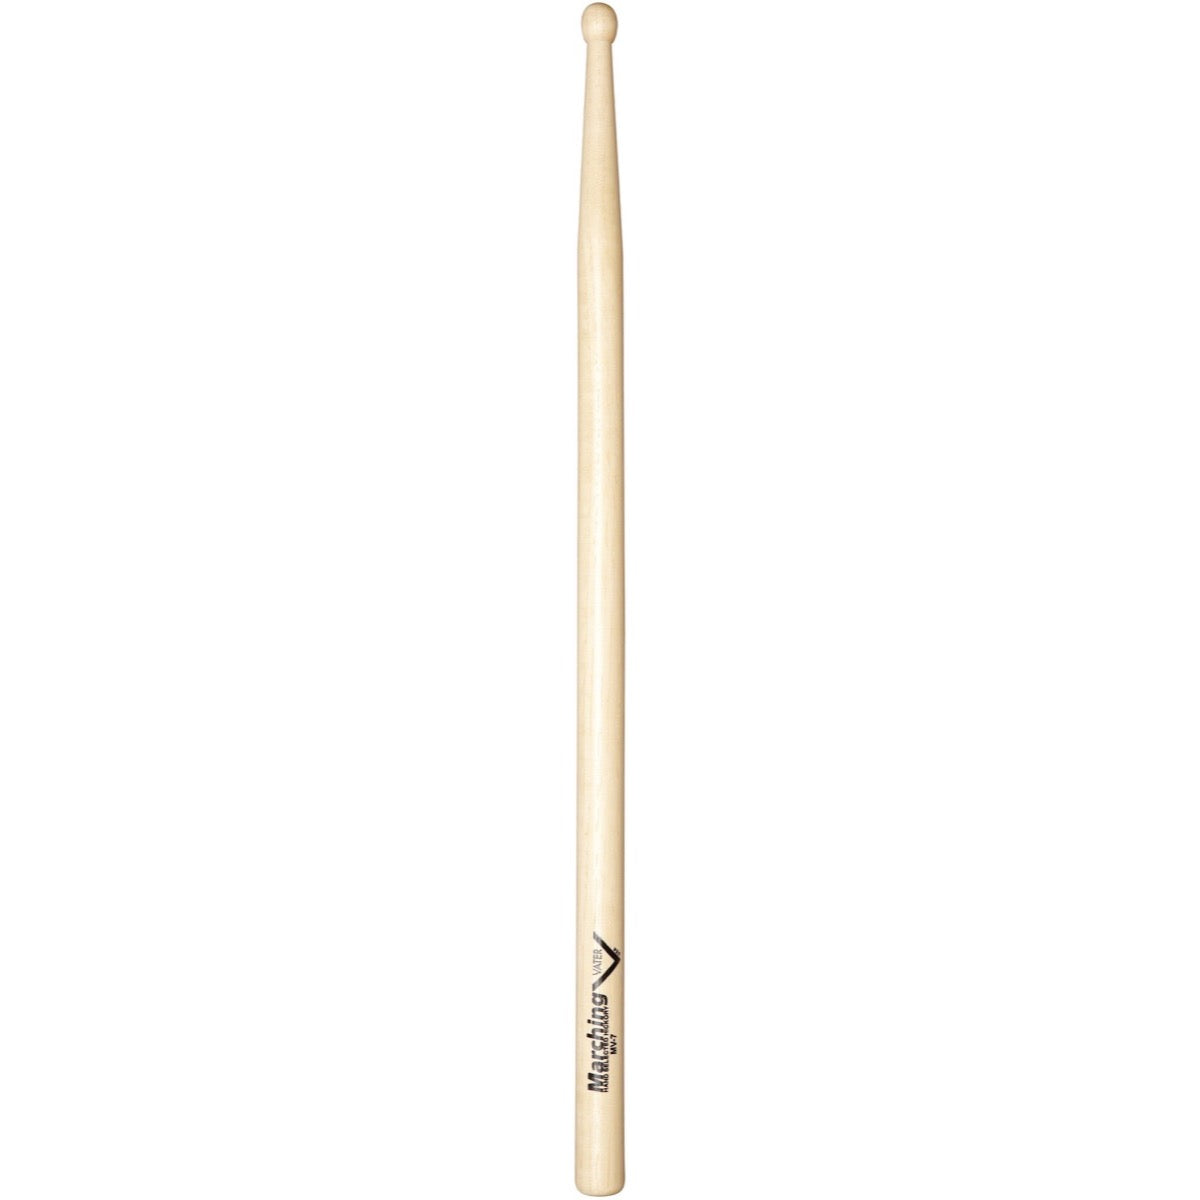 Vater MV7 Marching Snare and Tenor Drumsticks (Pair)